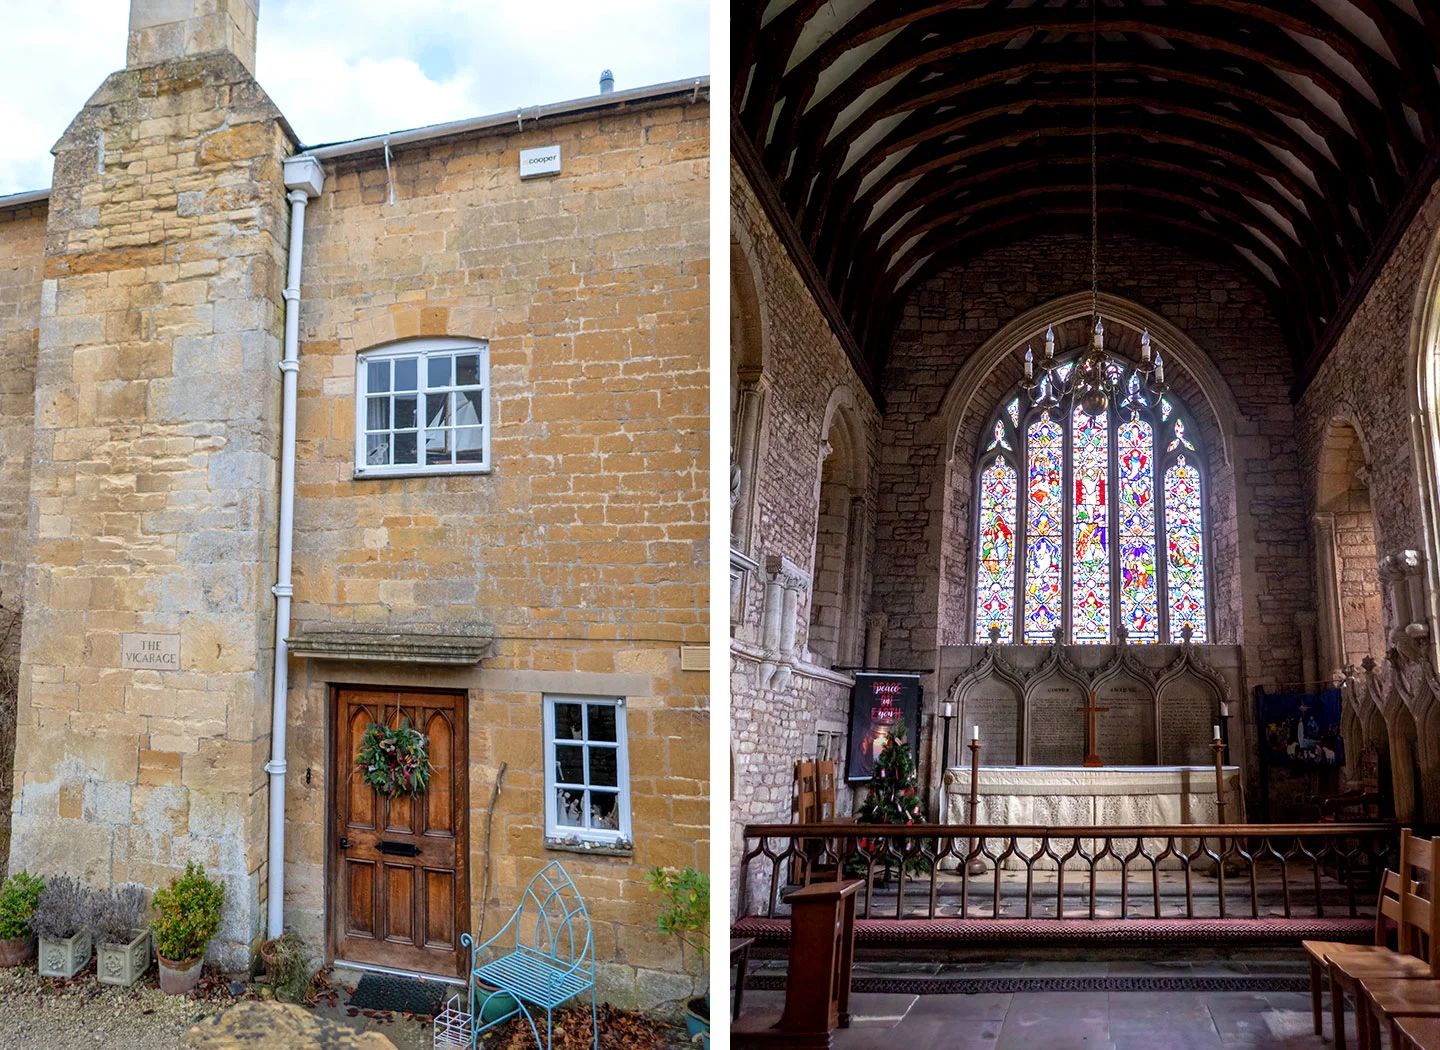 The vicarage and inside the church in Blockley